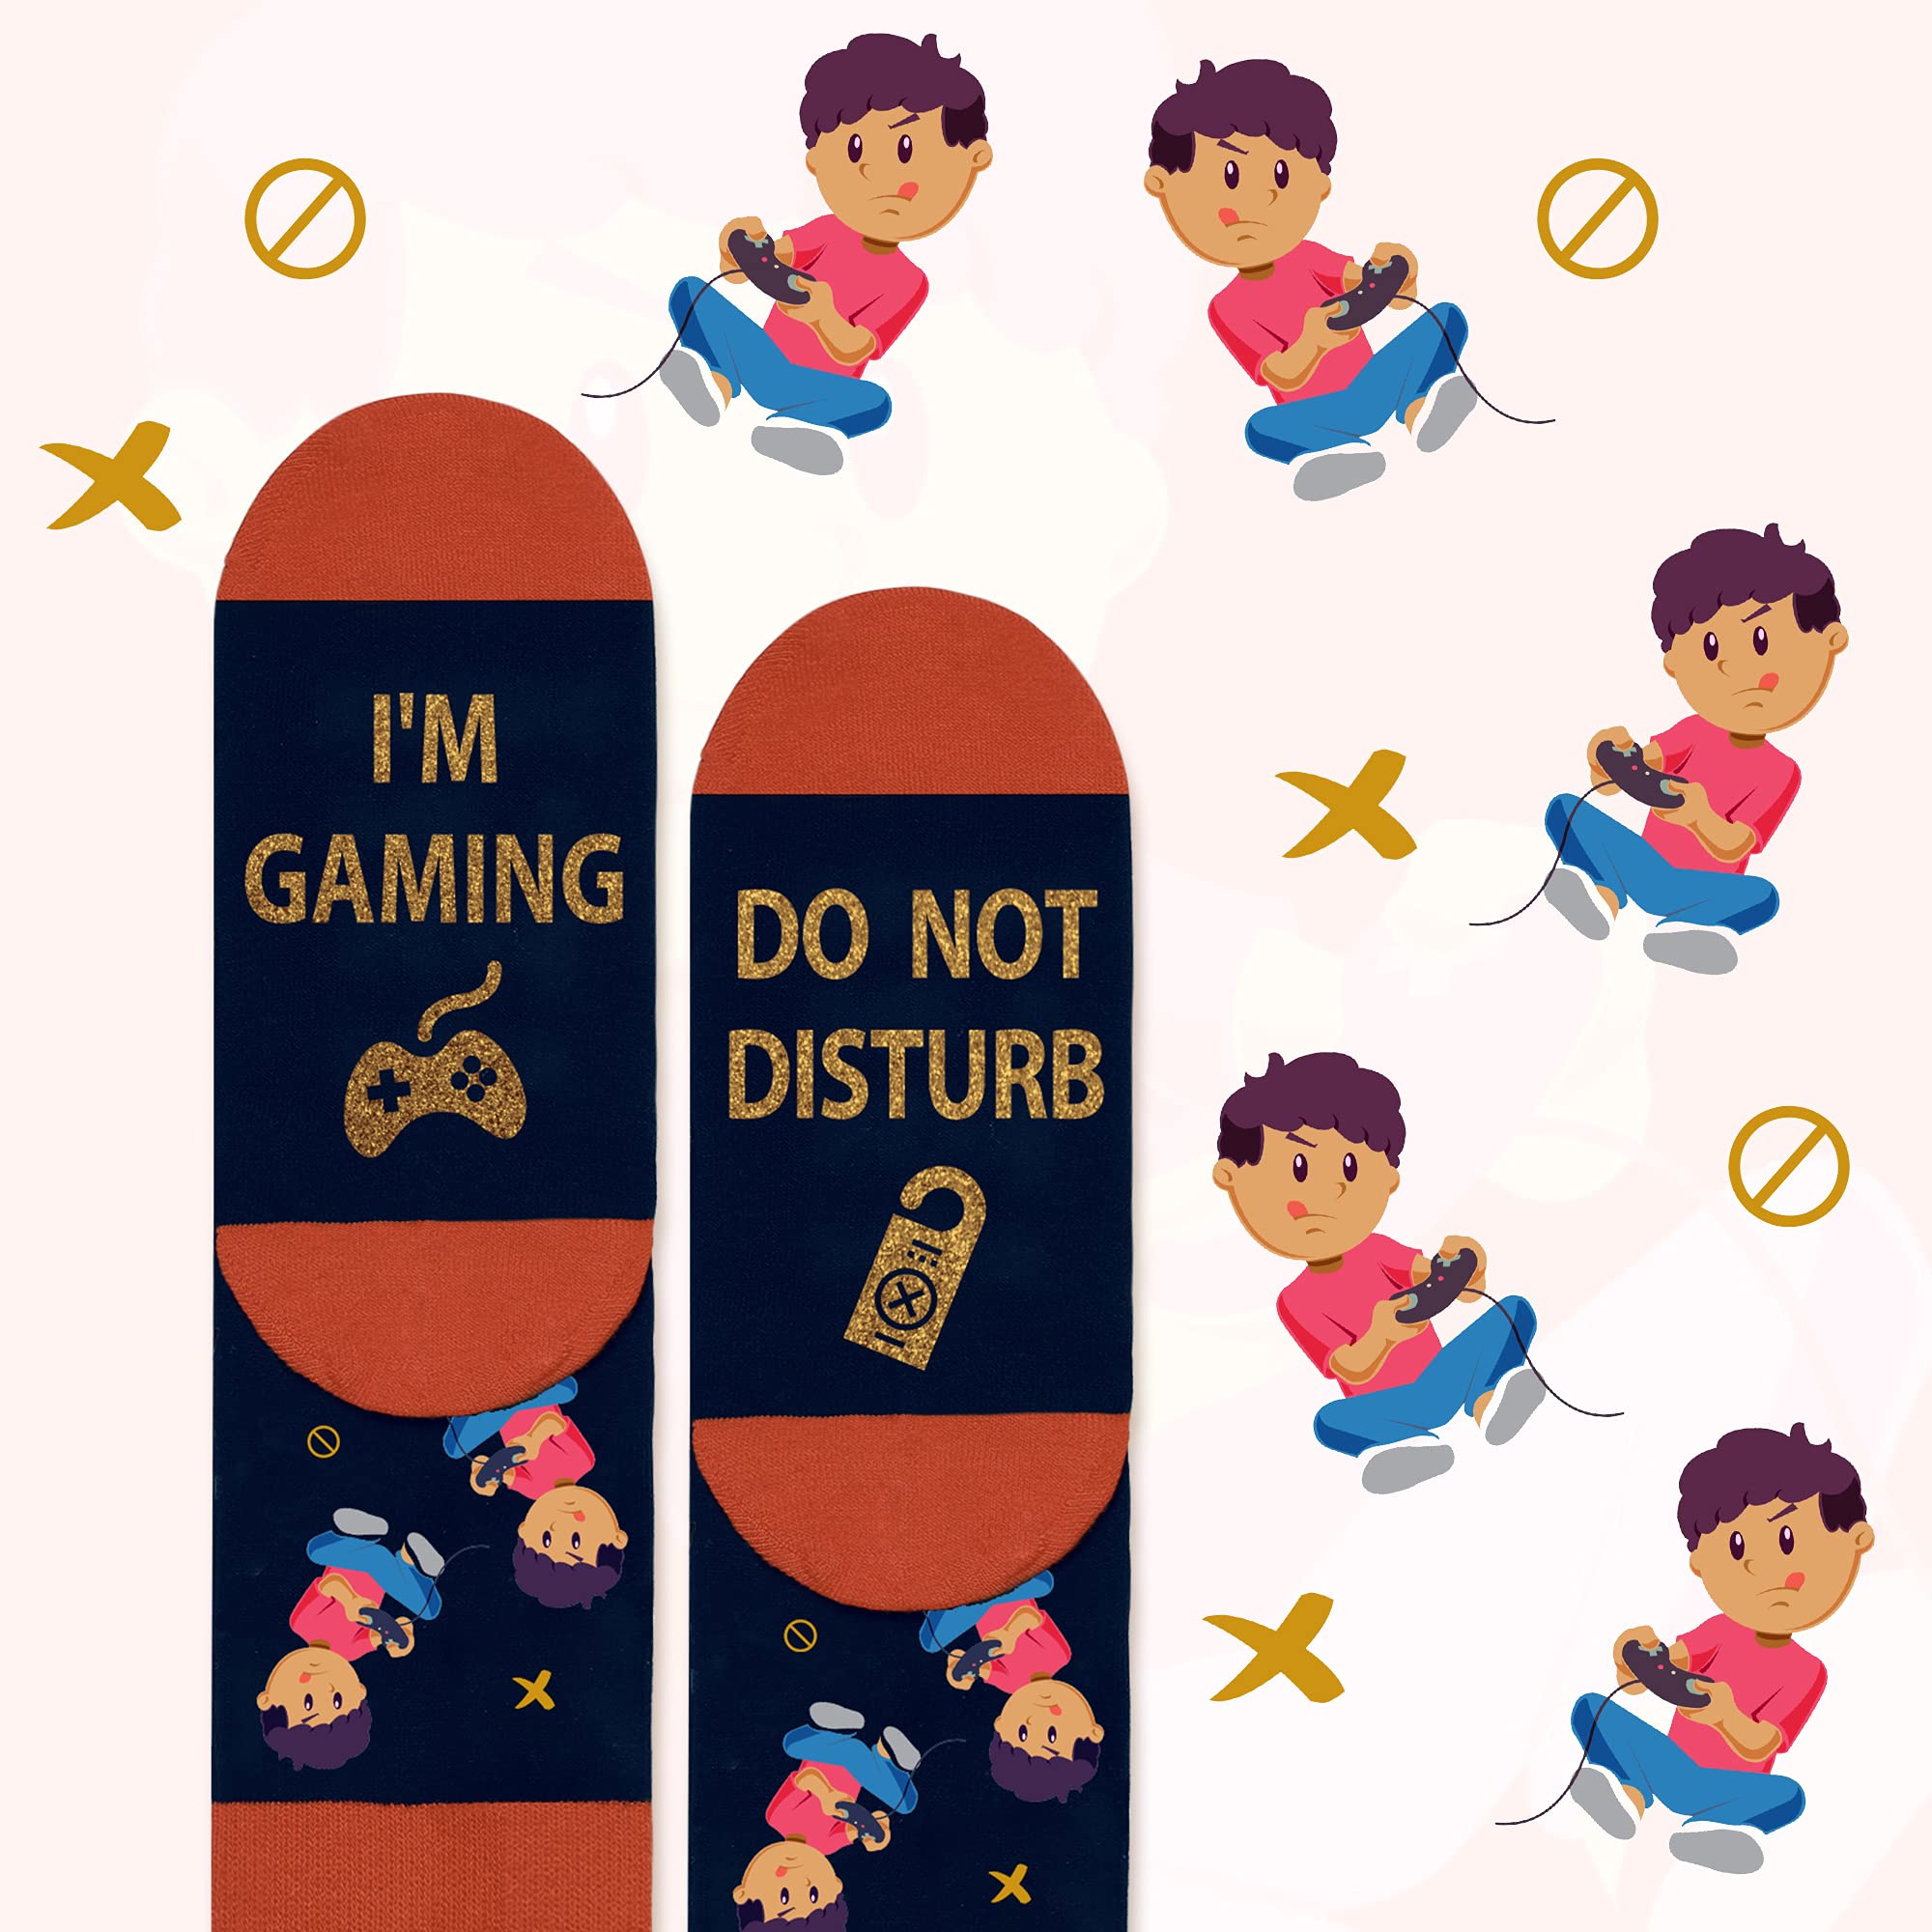 Funny Gamer Gaming Socks for Men Women Boys - Do Not Disturb Gaming Socks Fathers Day Novelty Gifts for Dad Husband Fun Socks -Game Lovers Valentines Crazy Gifts Stocking Fillers